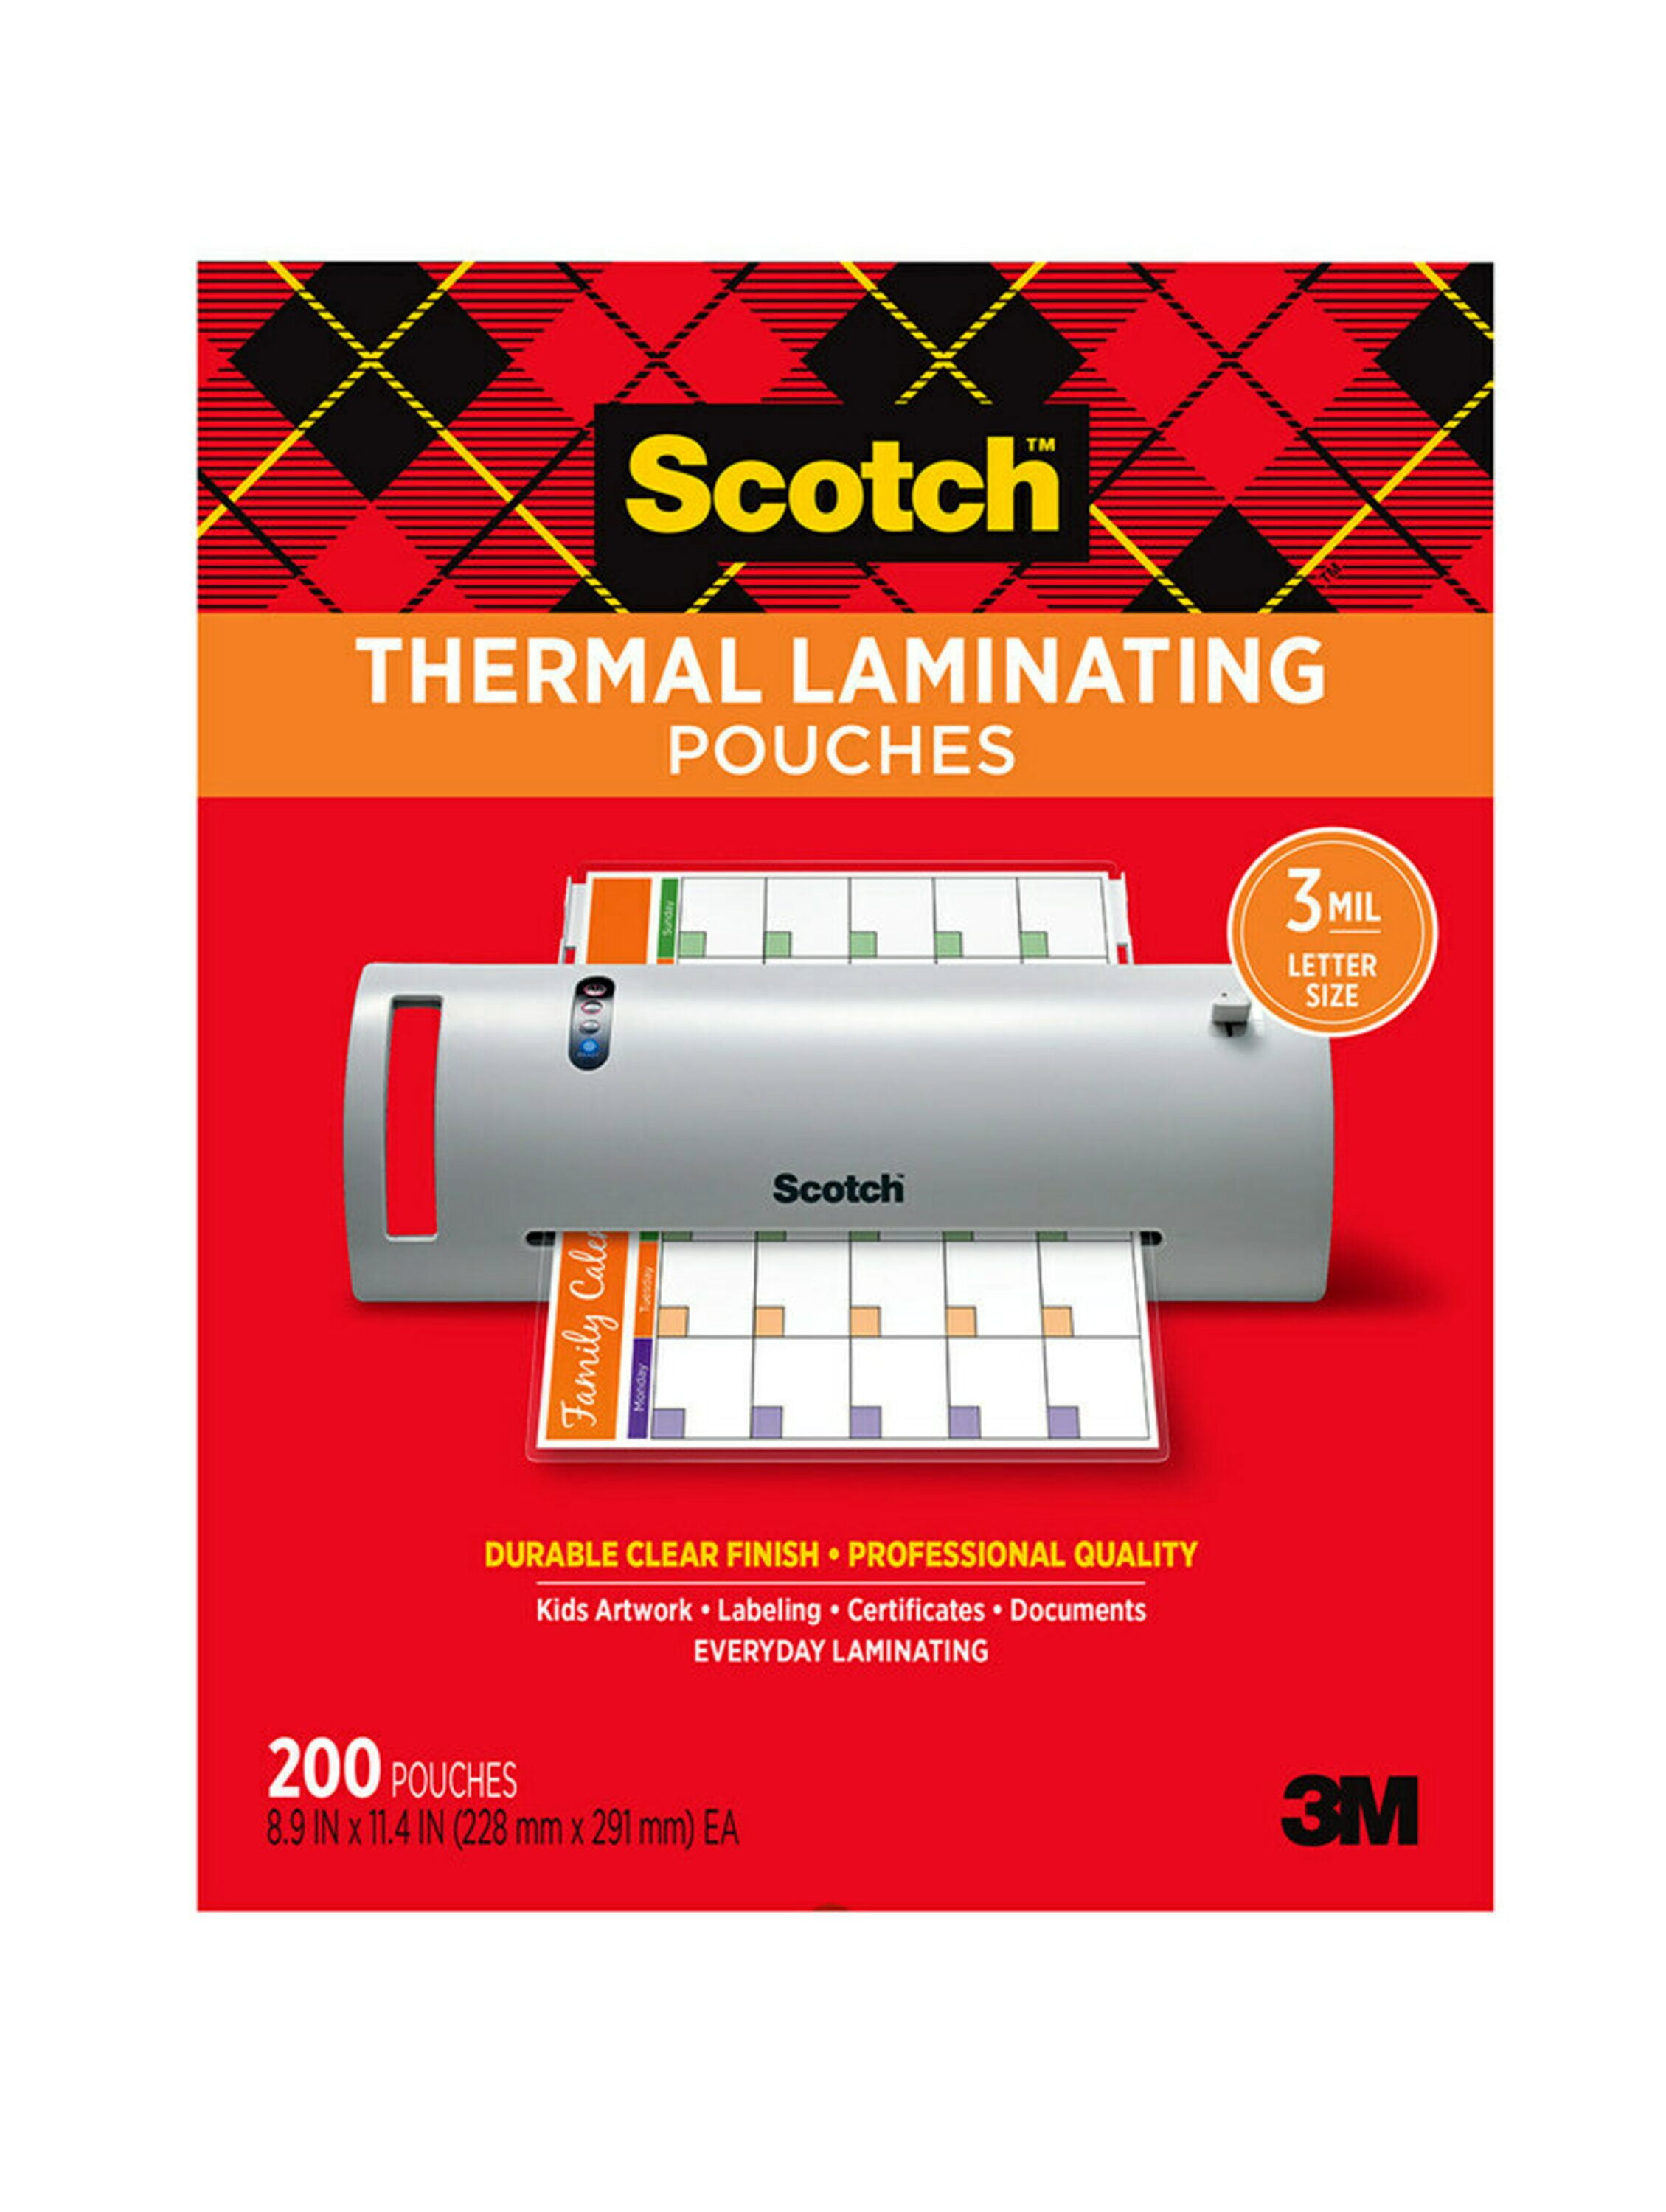 200 Letter 5 Mil Laminating Pouches Laminator Sheets 9 x 11-1/2 Scotch Quality 